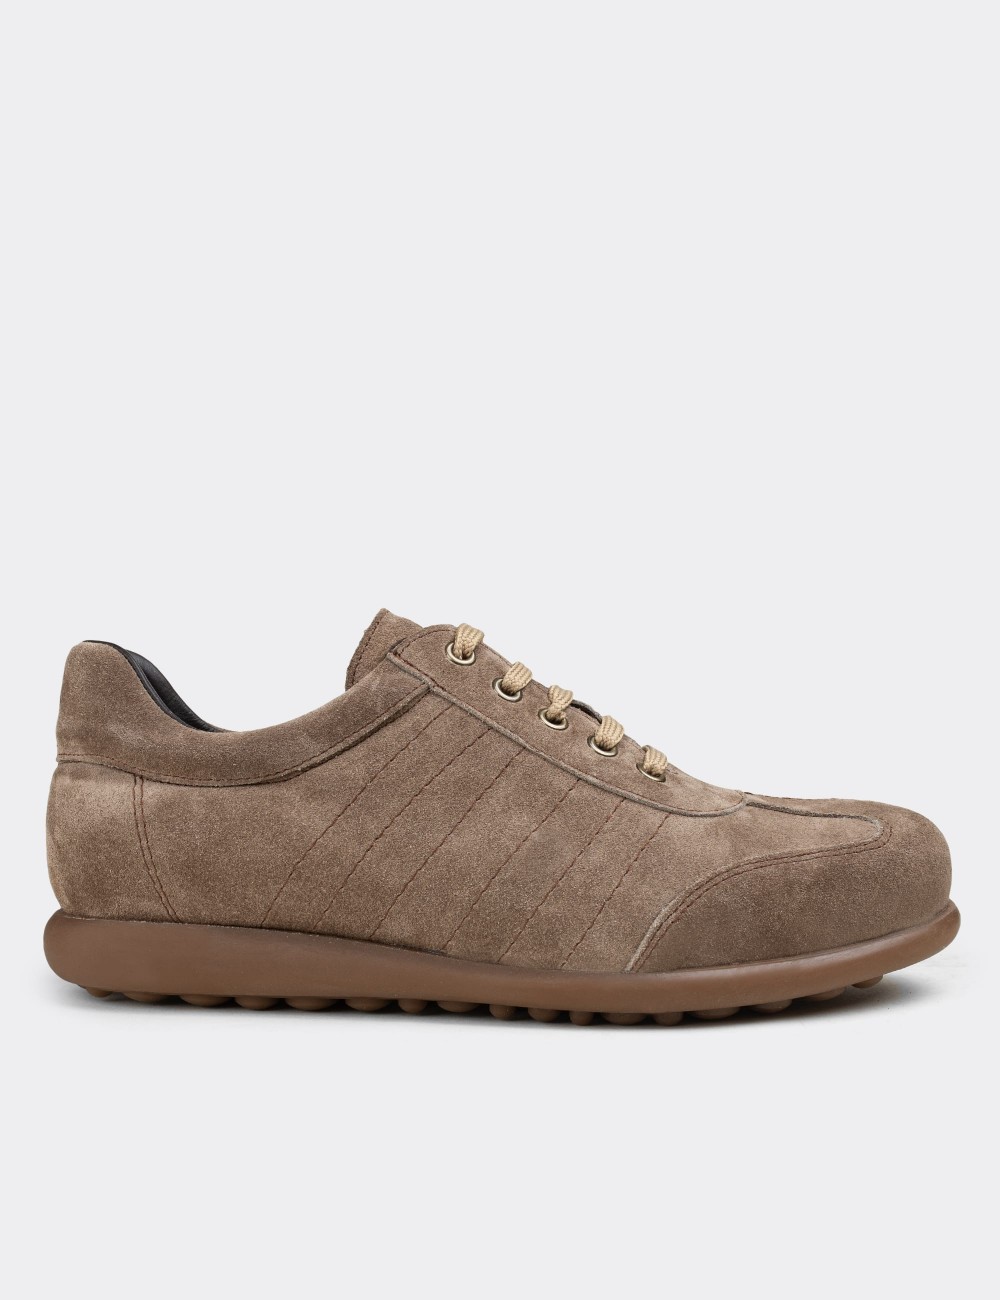 Sandstone Suede Leather Lace-up Shoes - 01826MVZNC01